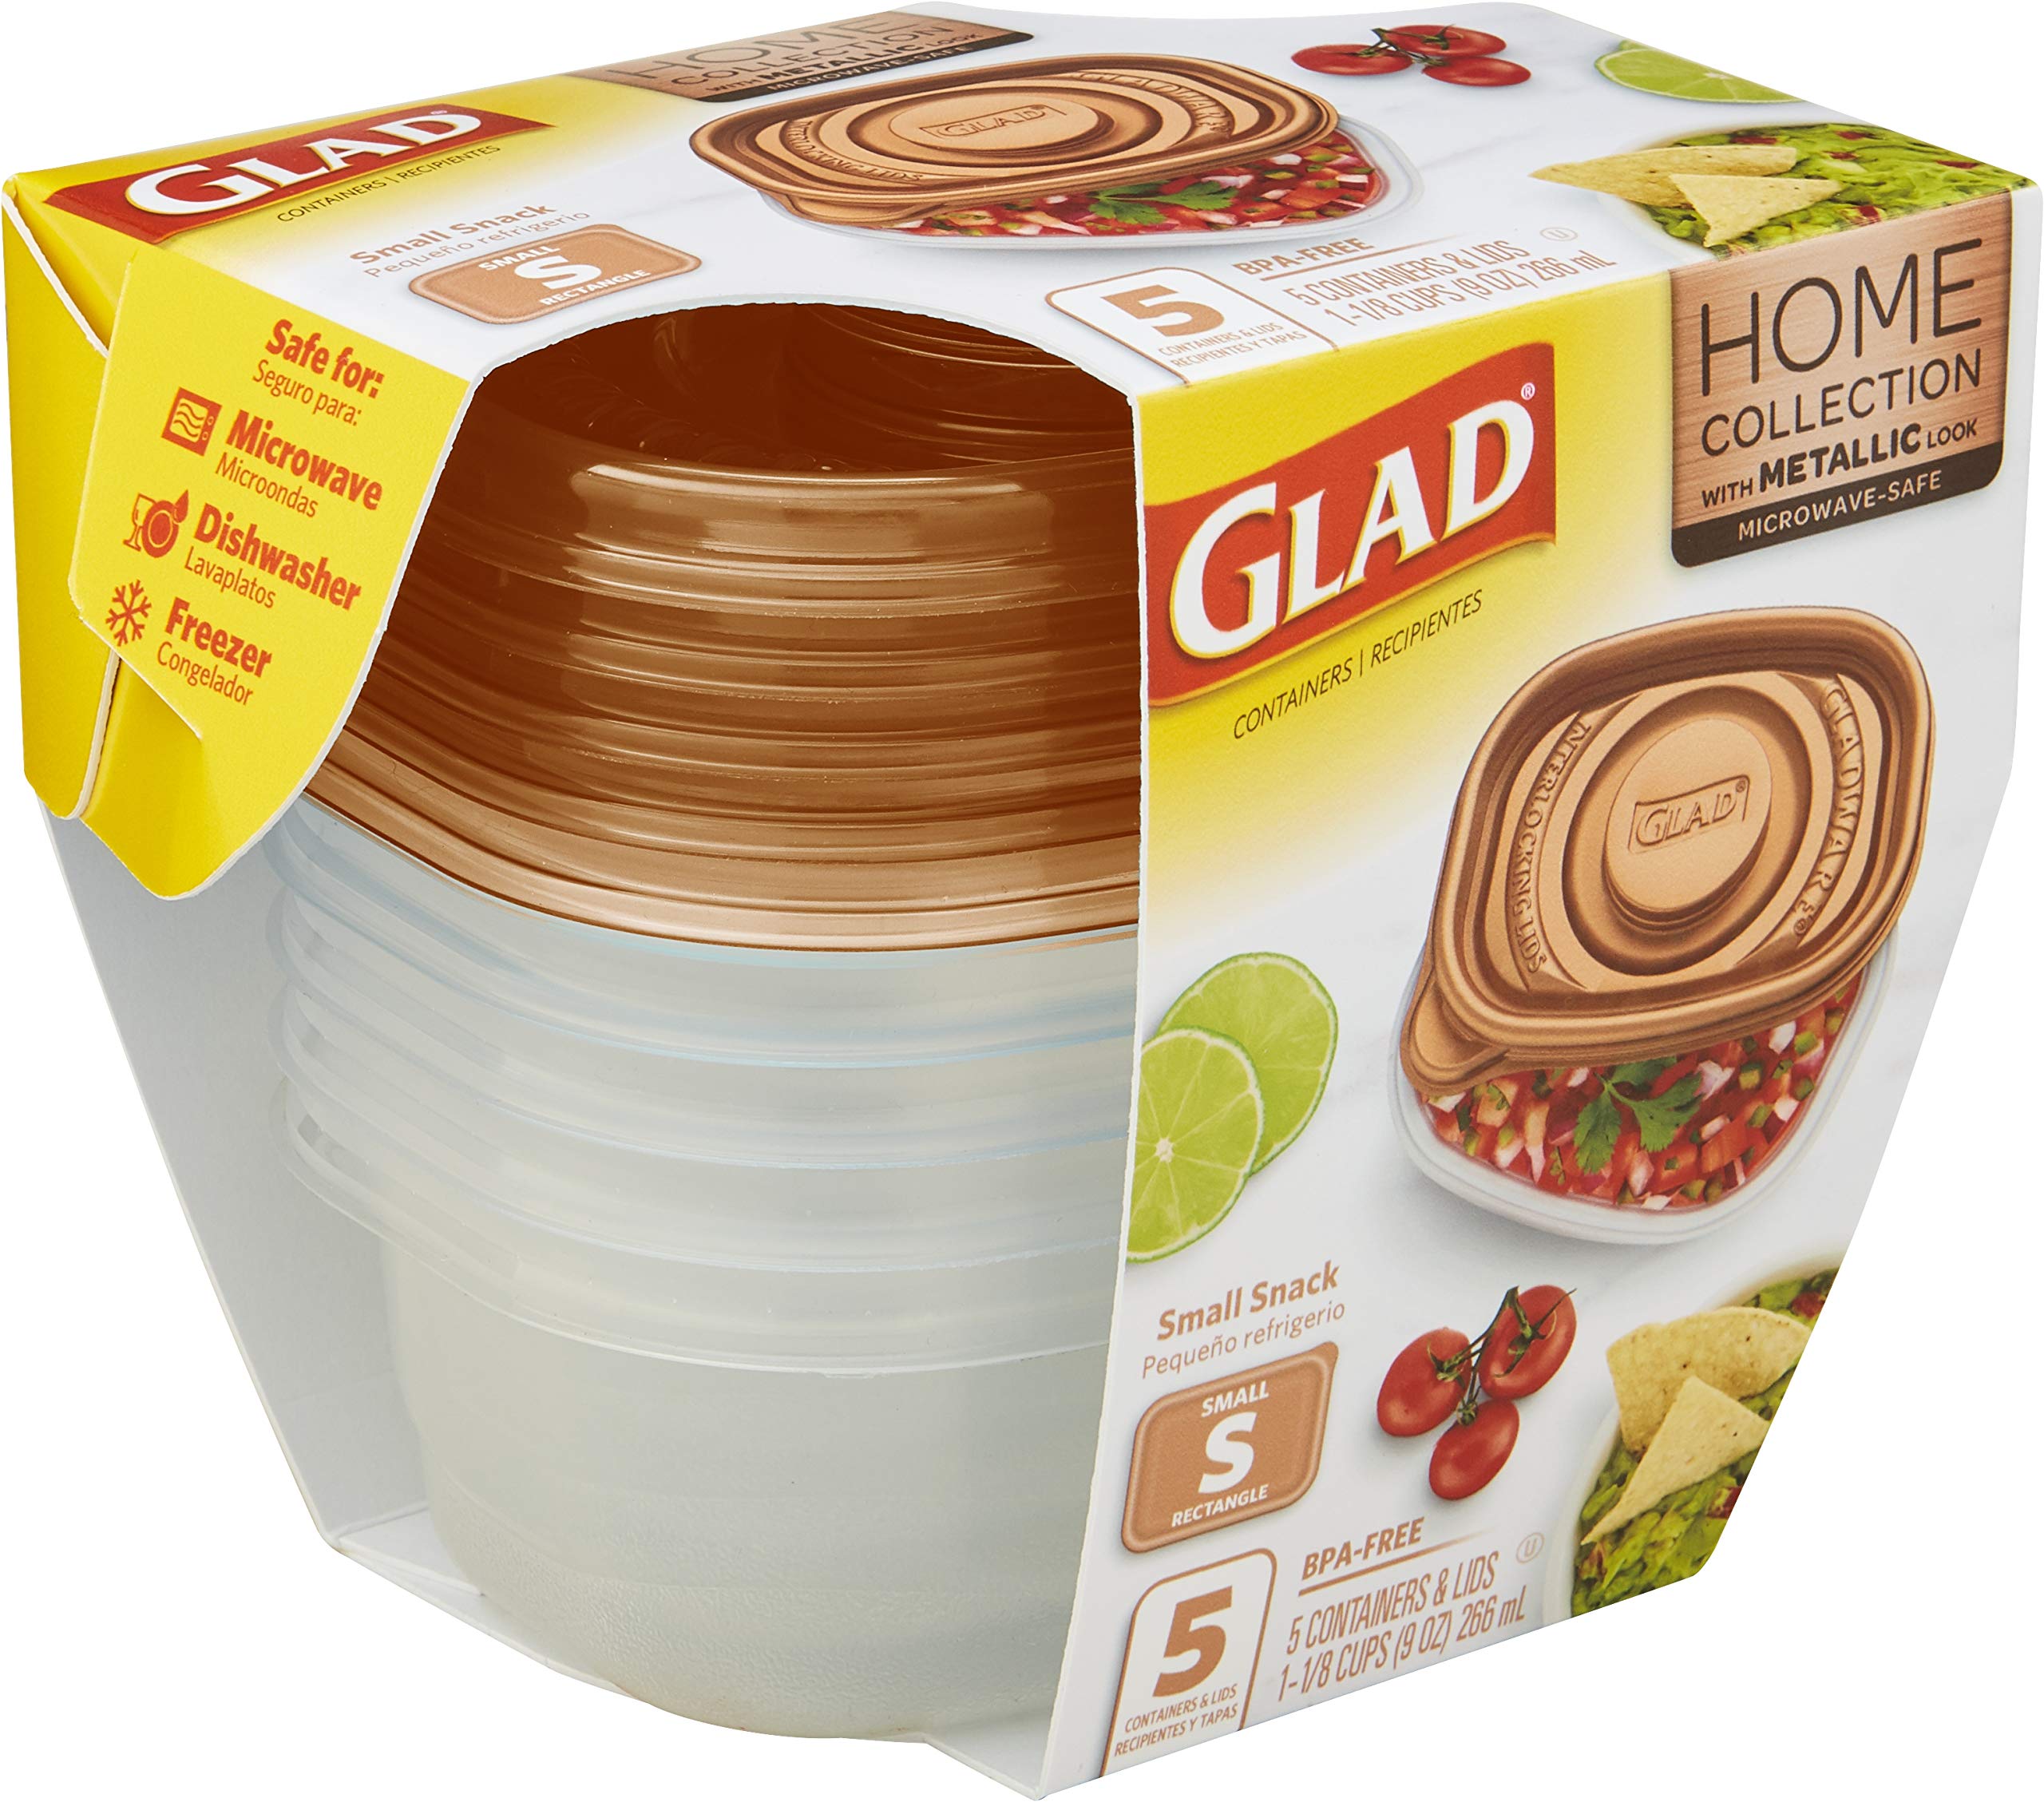 GladWare Home Snack Food Storage Containers, 5 Count Set, Small Rectangle Holds 9 Ounces of Food | With Glad Lock Tight Seal, BPA Free Containers and Lids $4.53